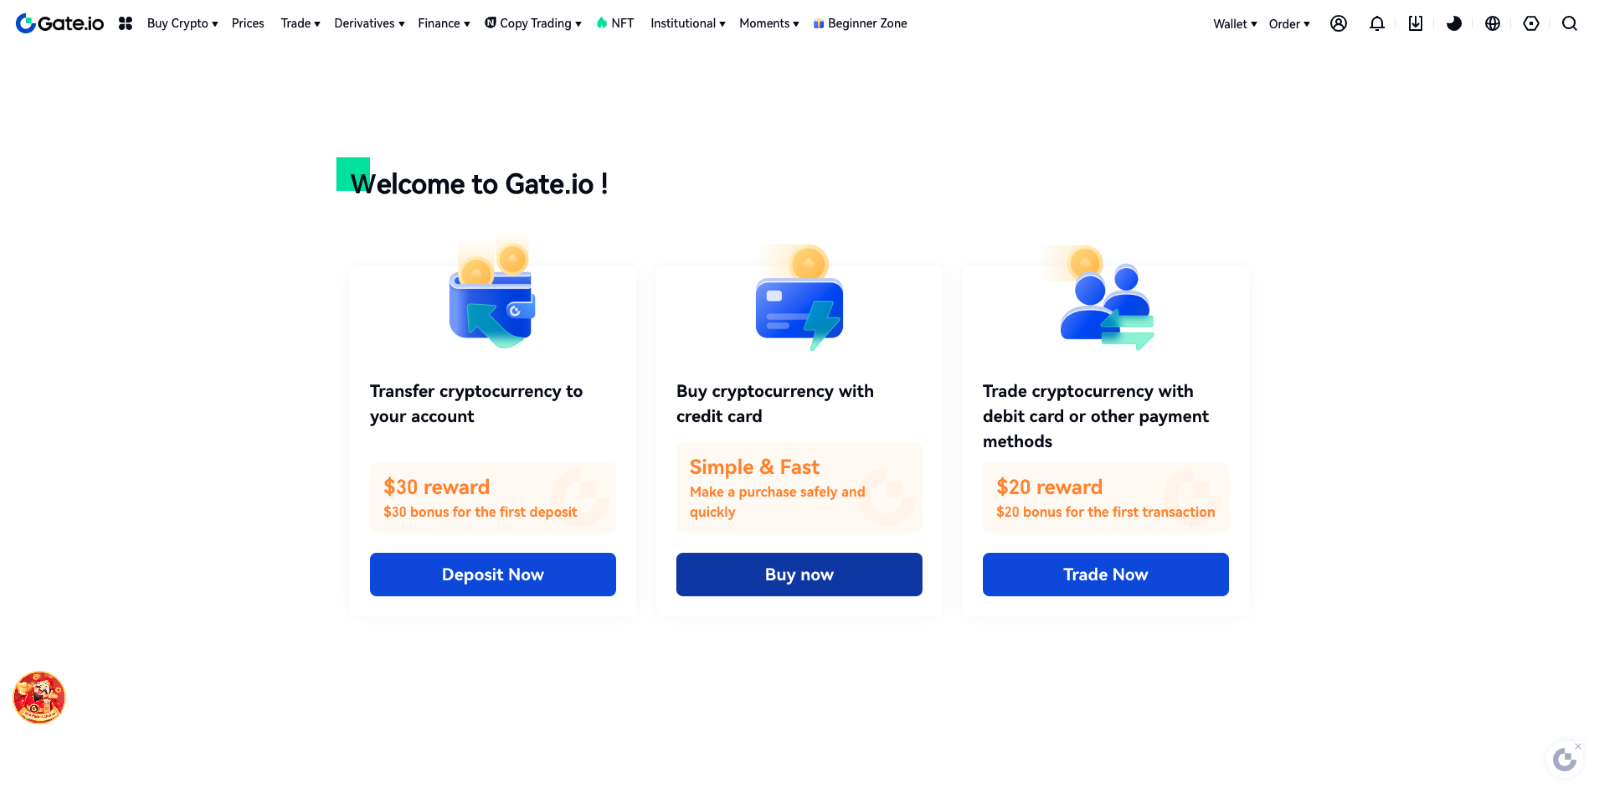 Welcome to Gate.io